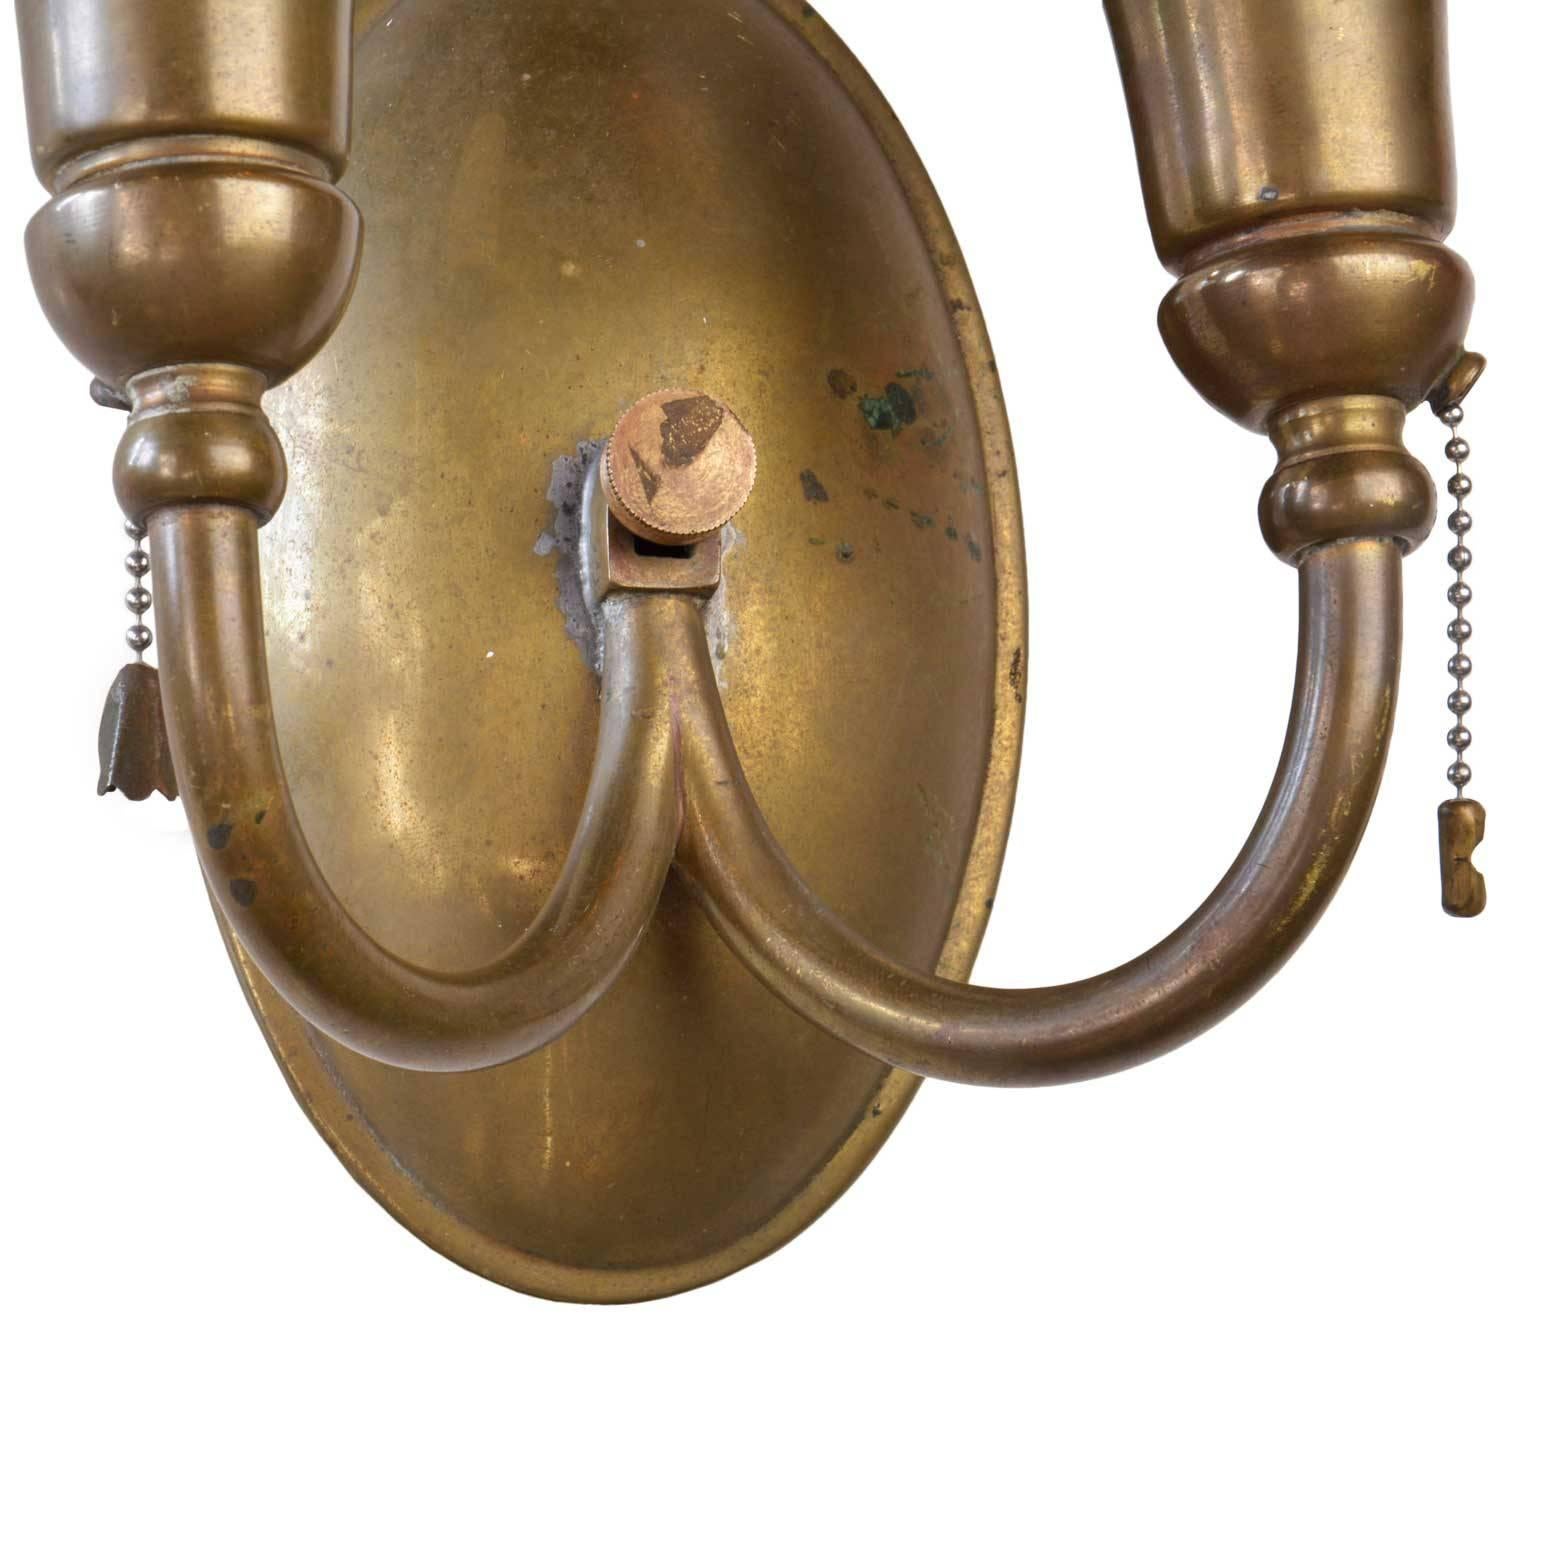 Handsome and simple signed Bradley and Hubbard brass sconce suite that includes one two-arm sconce and two single candle sconces. The heavy cast brass still has its original patina and pull chains. Signed B & H on the back of each fixture. All three